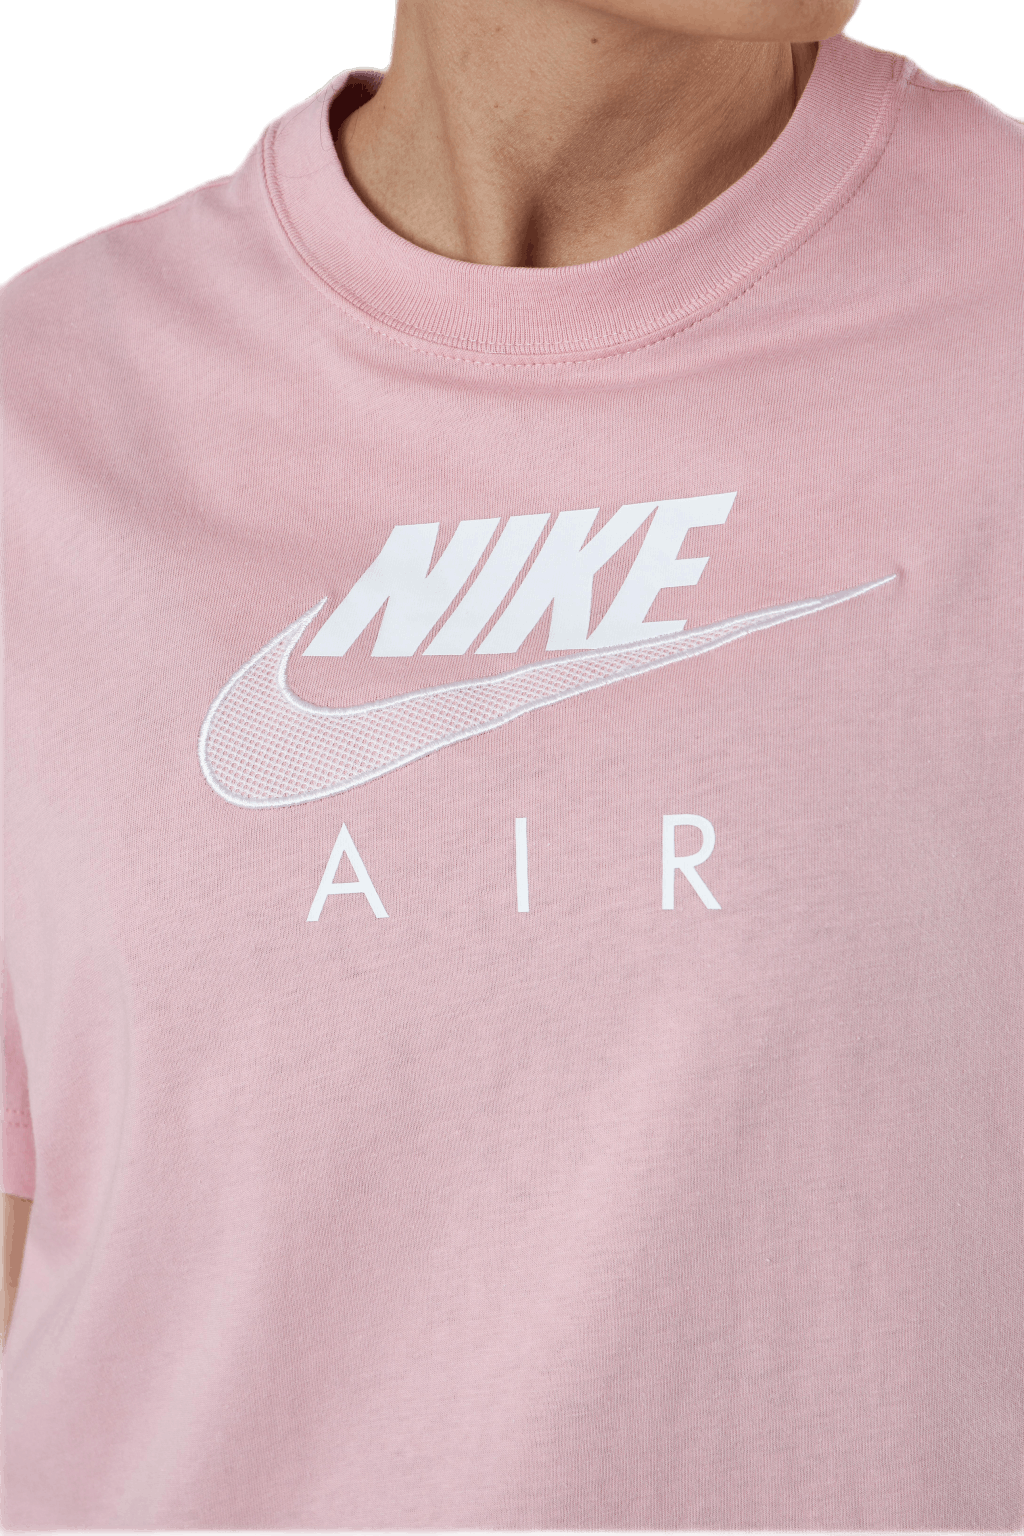 Nsw Air Bf Top Pink